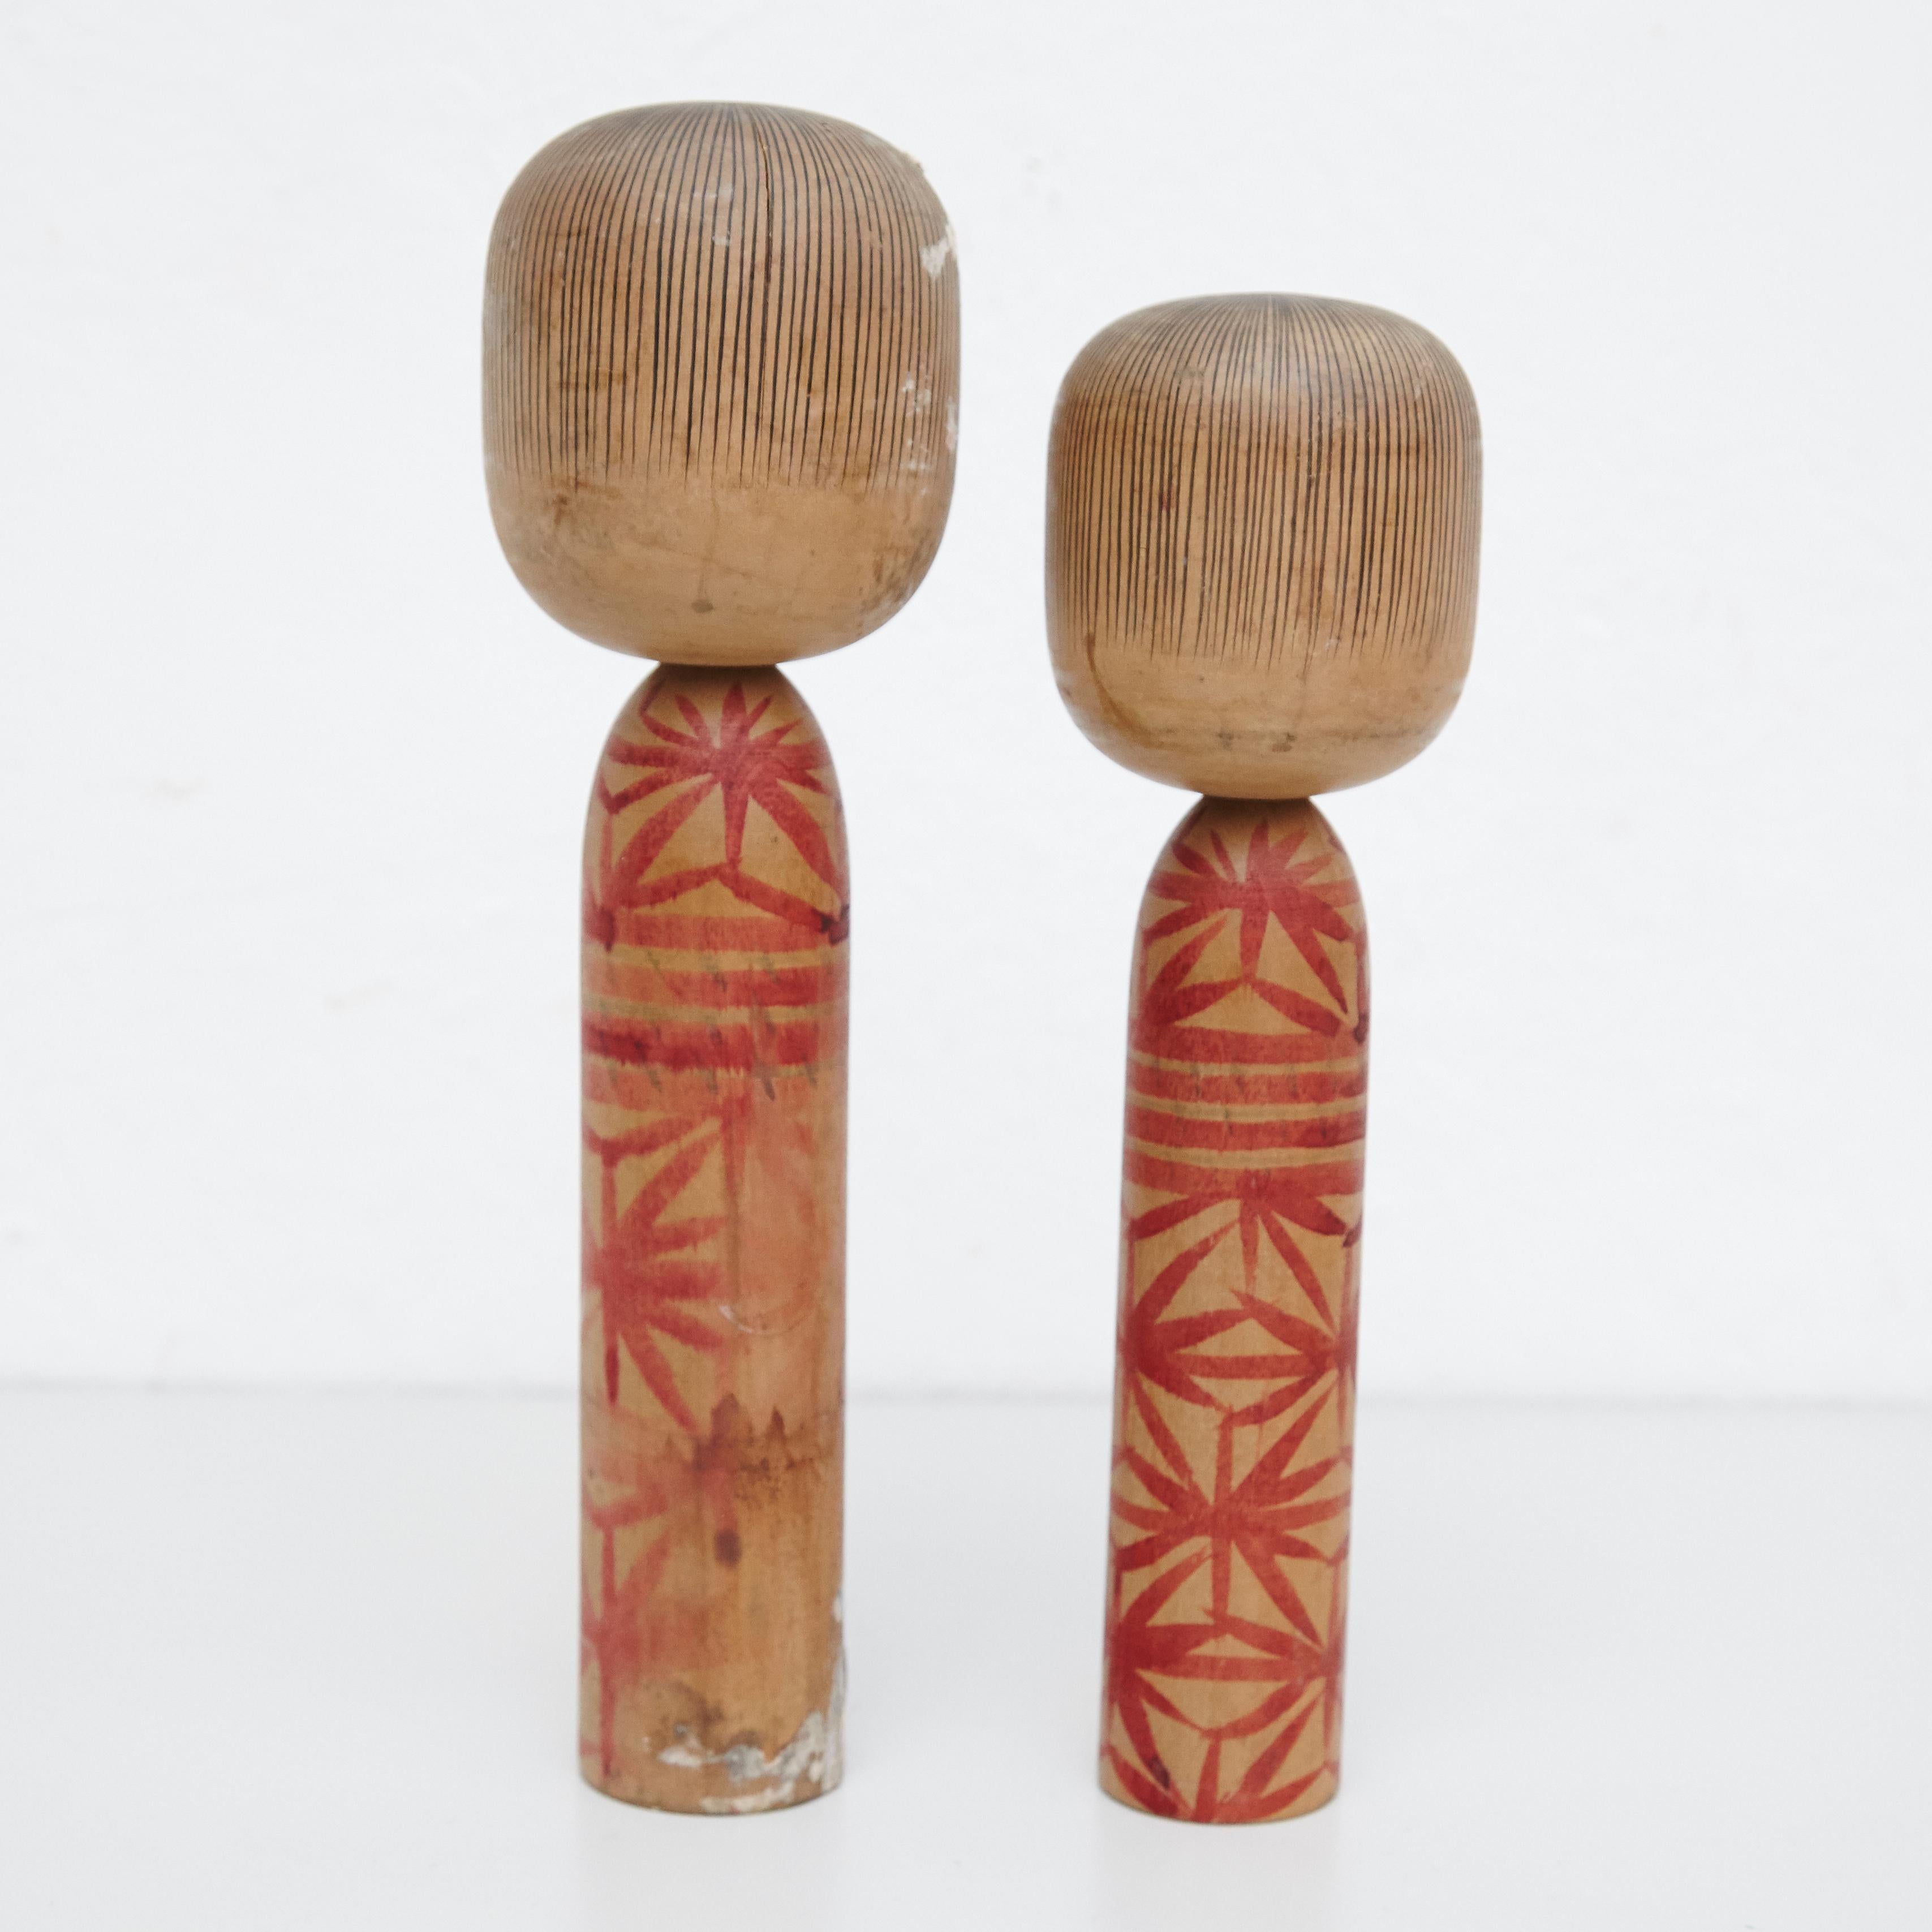 Japanese dolls called Kokeshi of the early 20th century.
Provenance from the northern Japan.
Set of 2.

Measures: 

30 x 8,5 cm
27 x 7,5 cm


Handmade by Japanese artisants from wood. Have a simple trunk as a body and an enlarged head. One